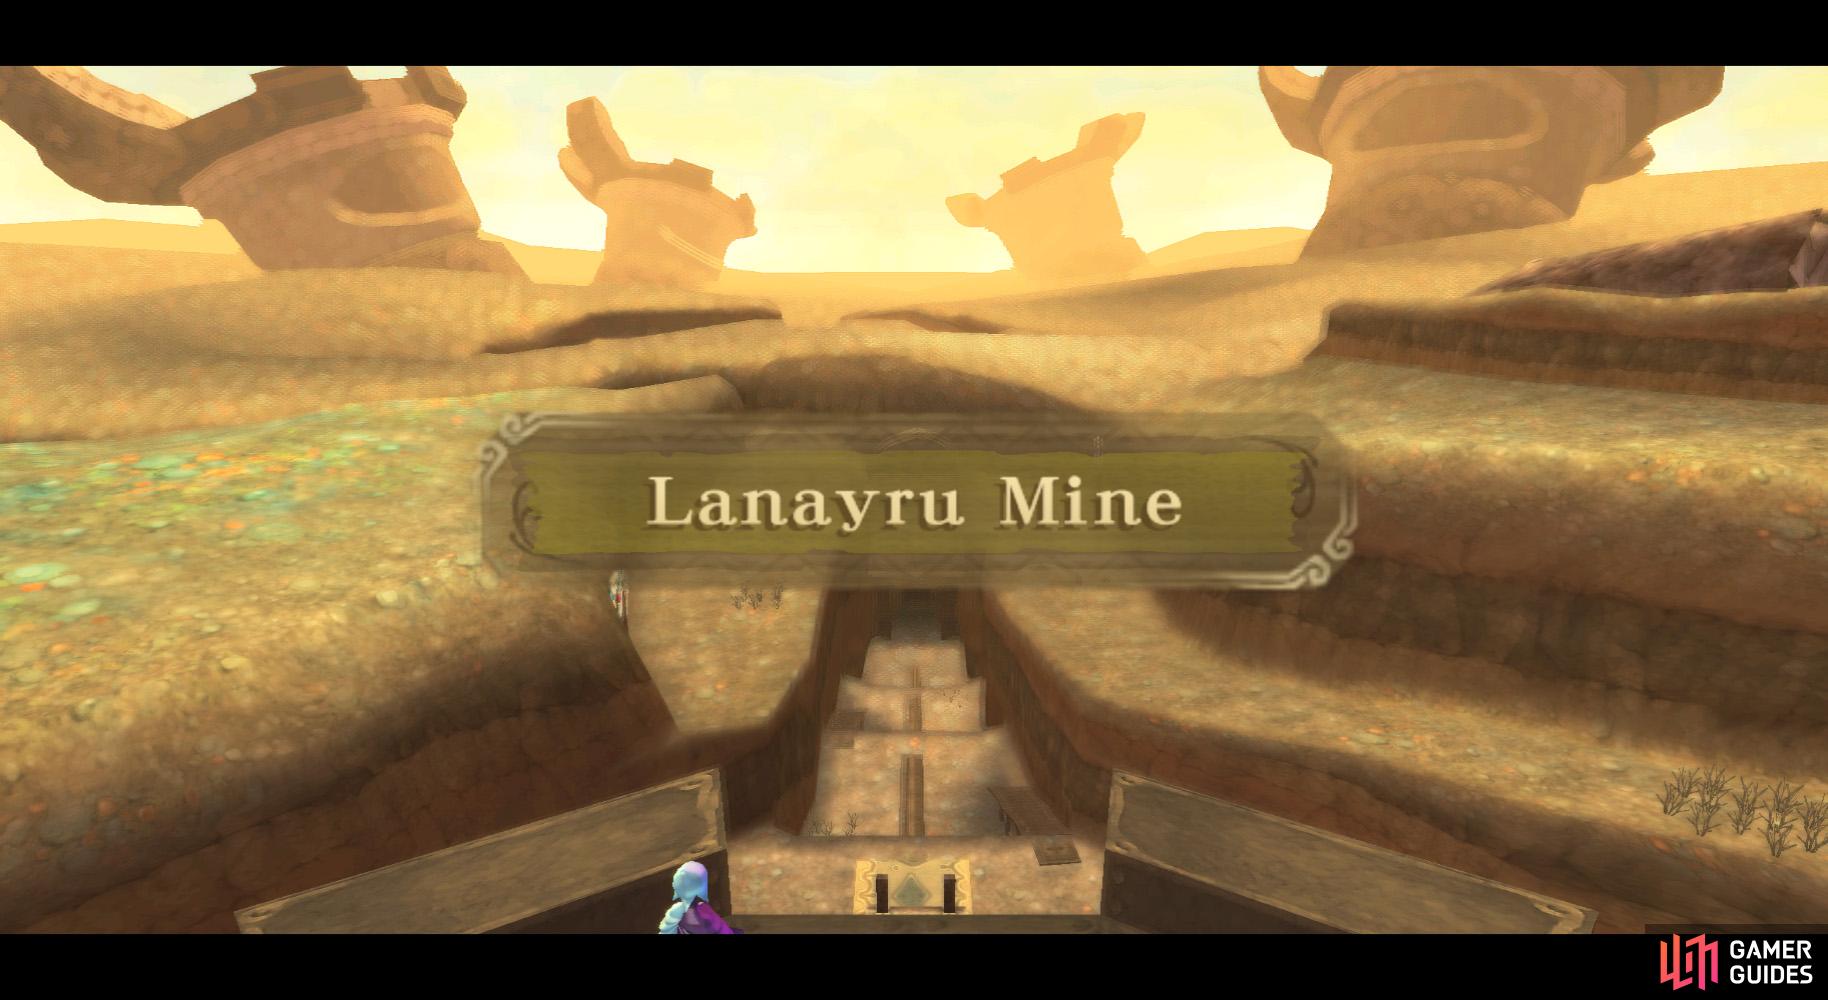 Your journey in the Lanayru region begins in this abandoned mine.